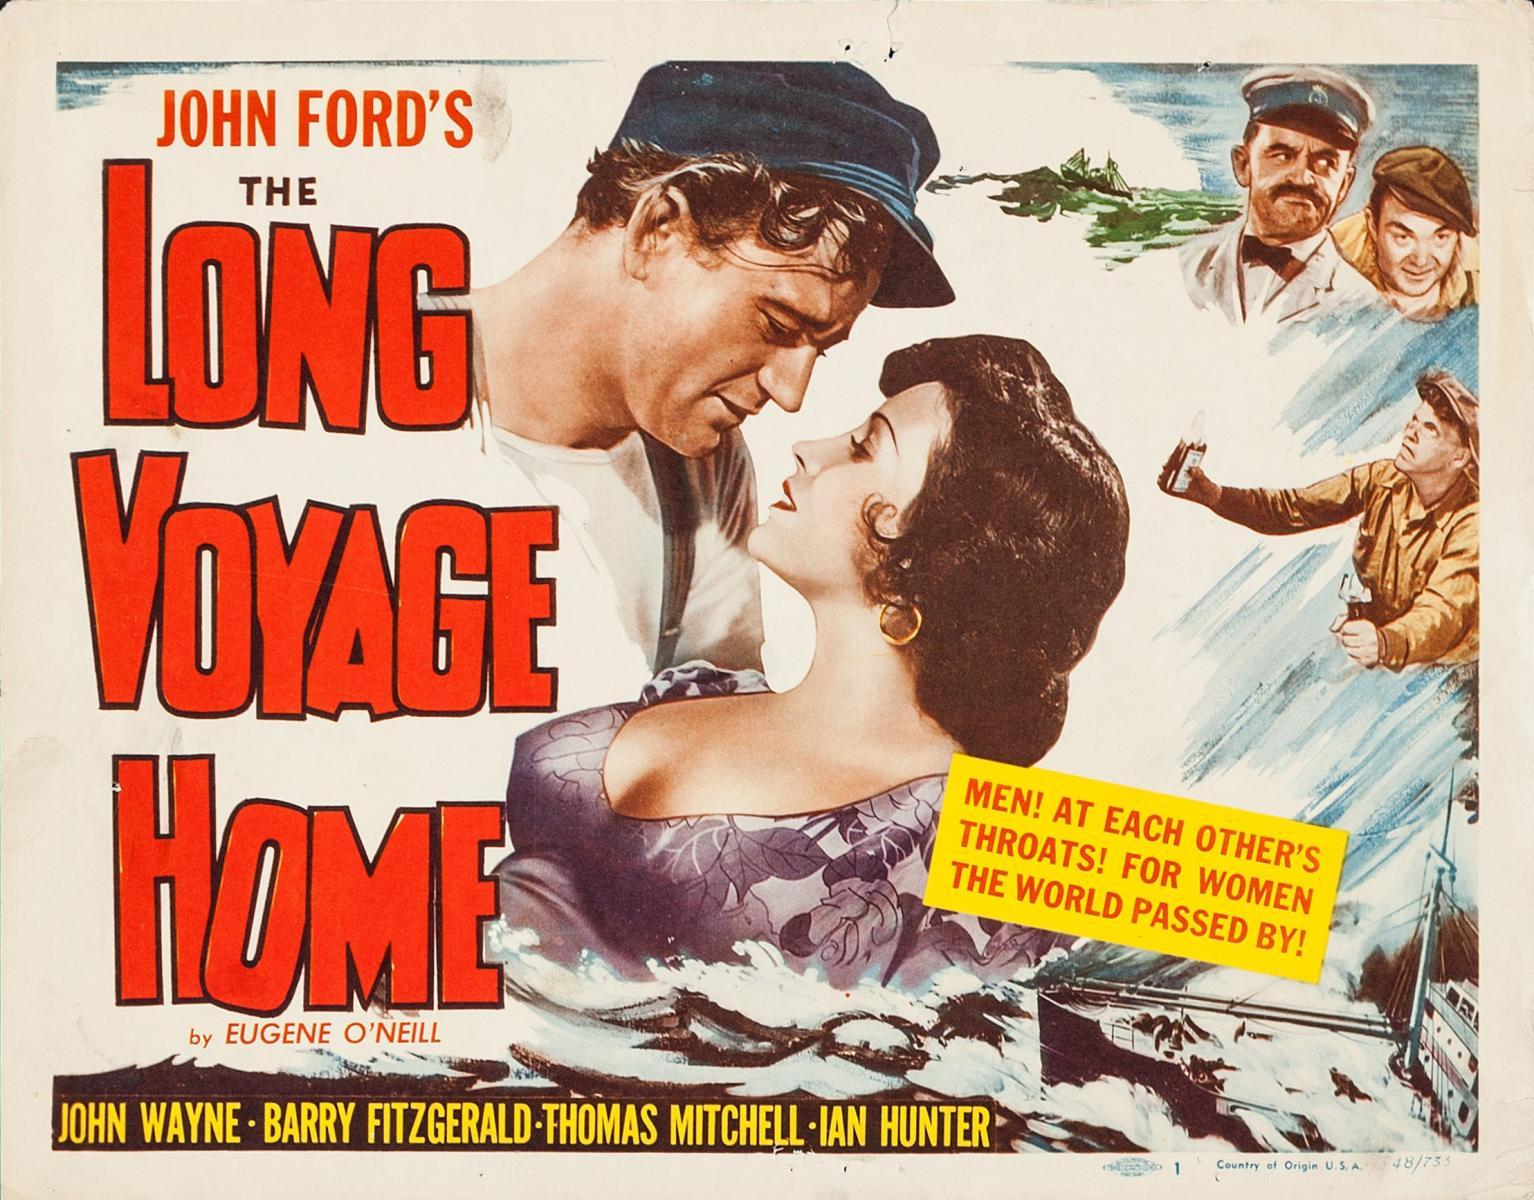 the long voyage home film